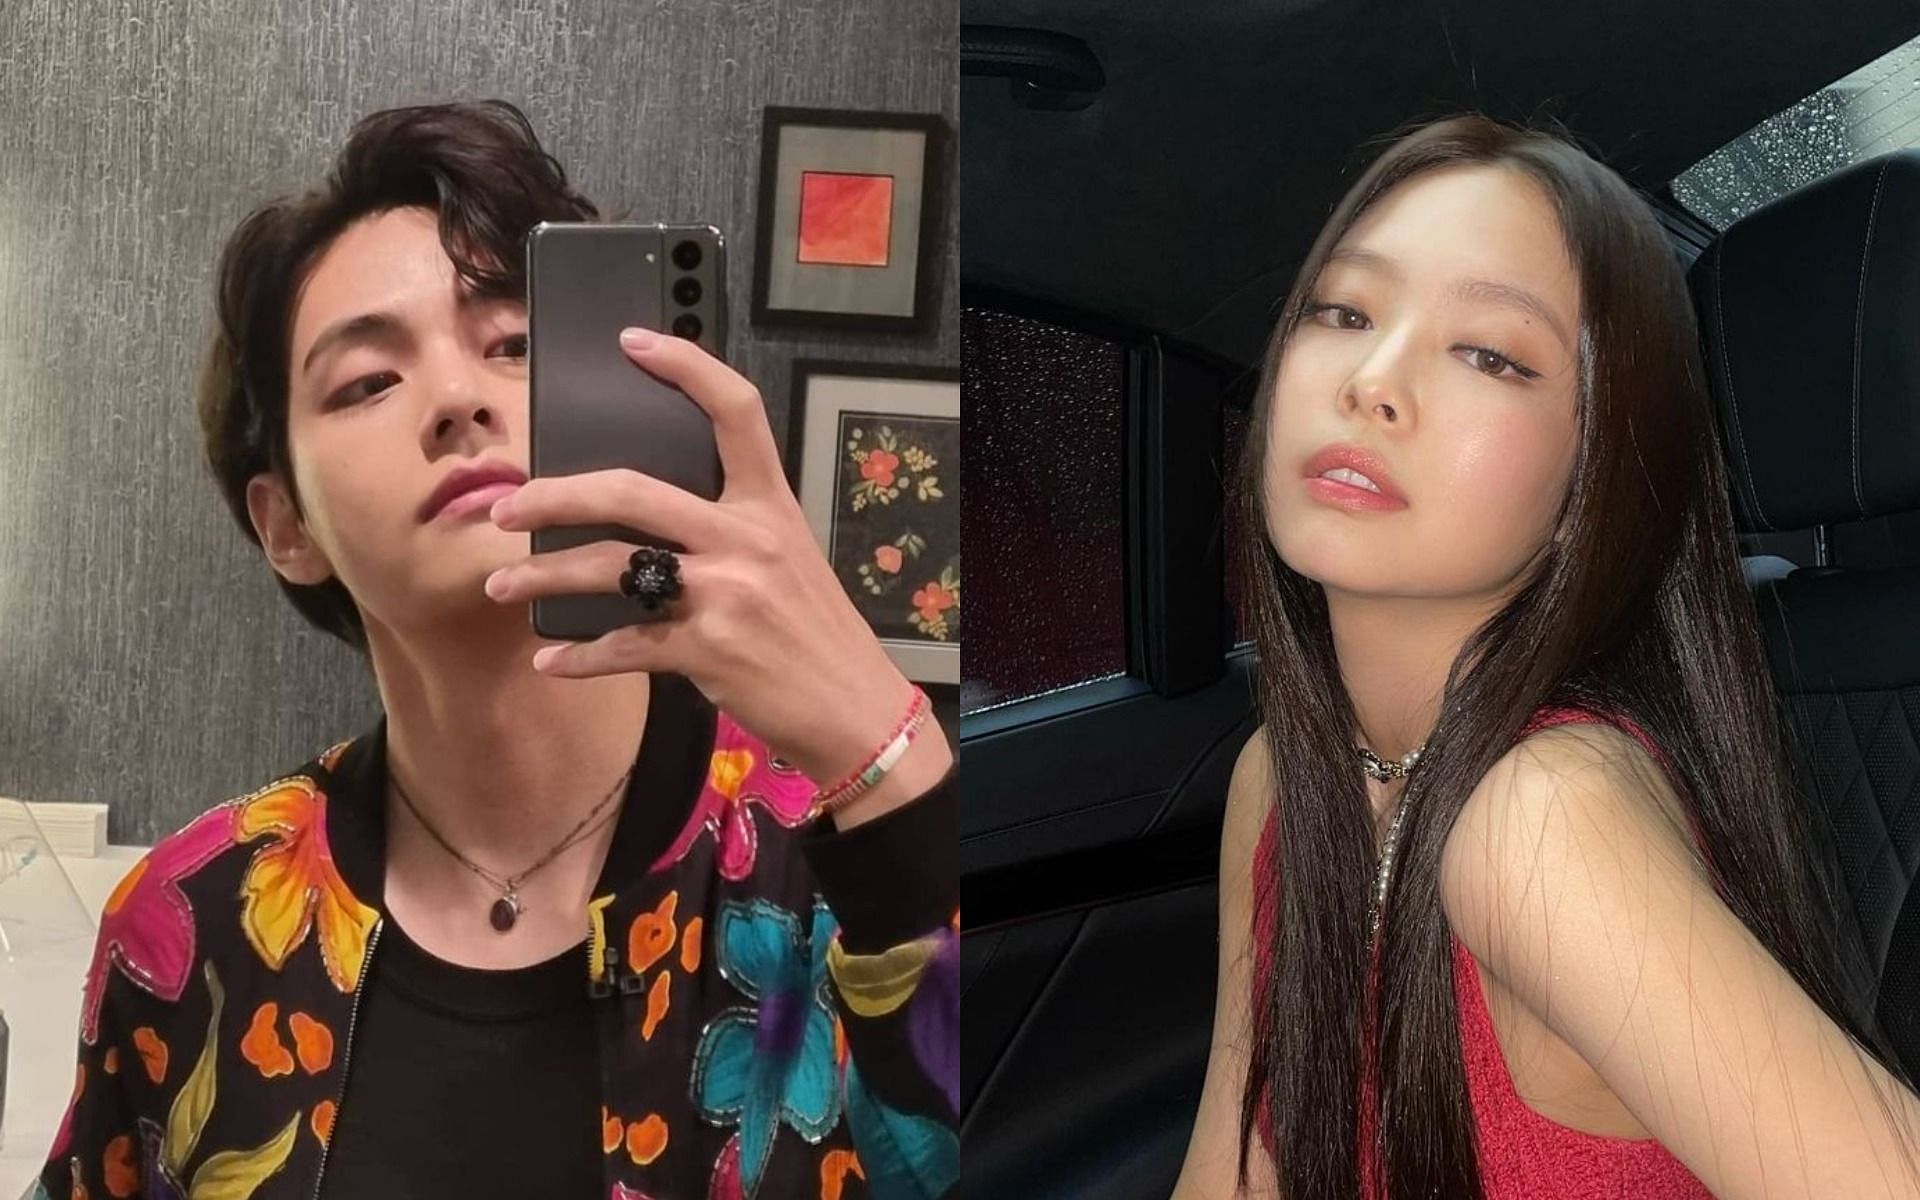 BTS' Kim Taehyung accidentally following BLACKPINK Jennie's Instagram account leads to an uproar